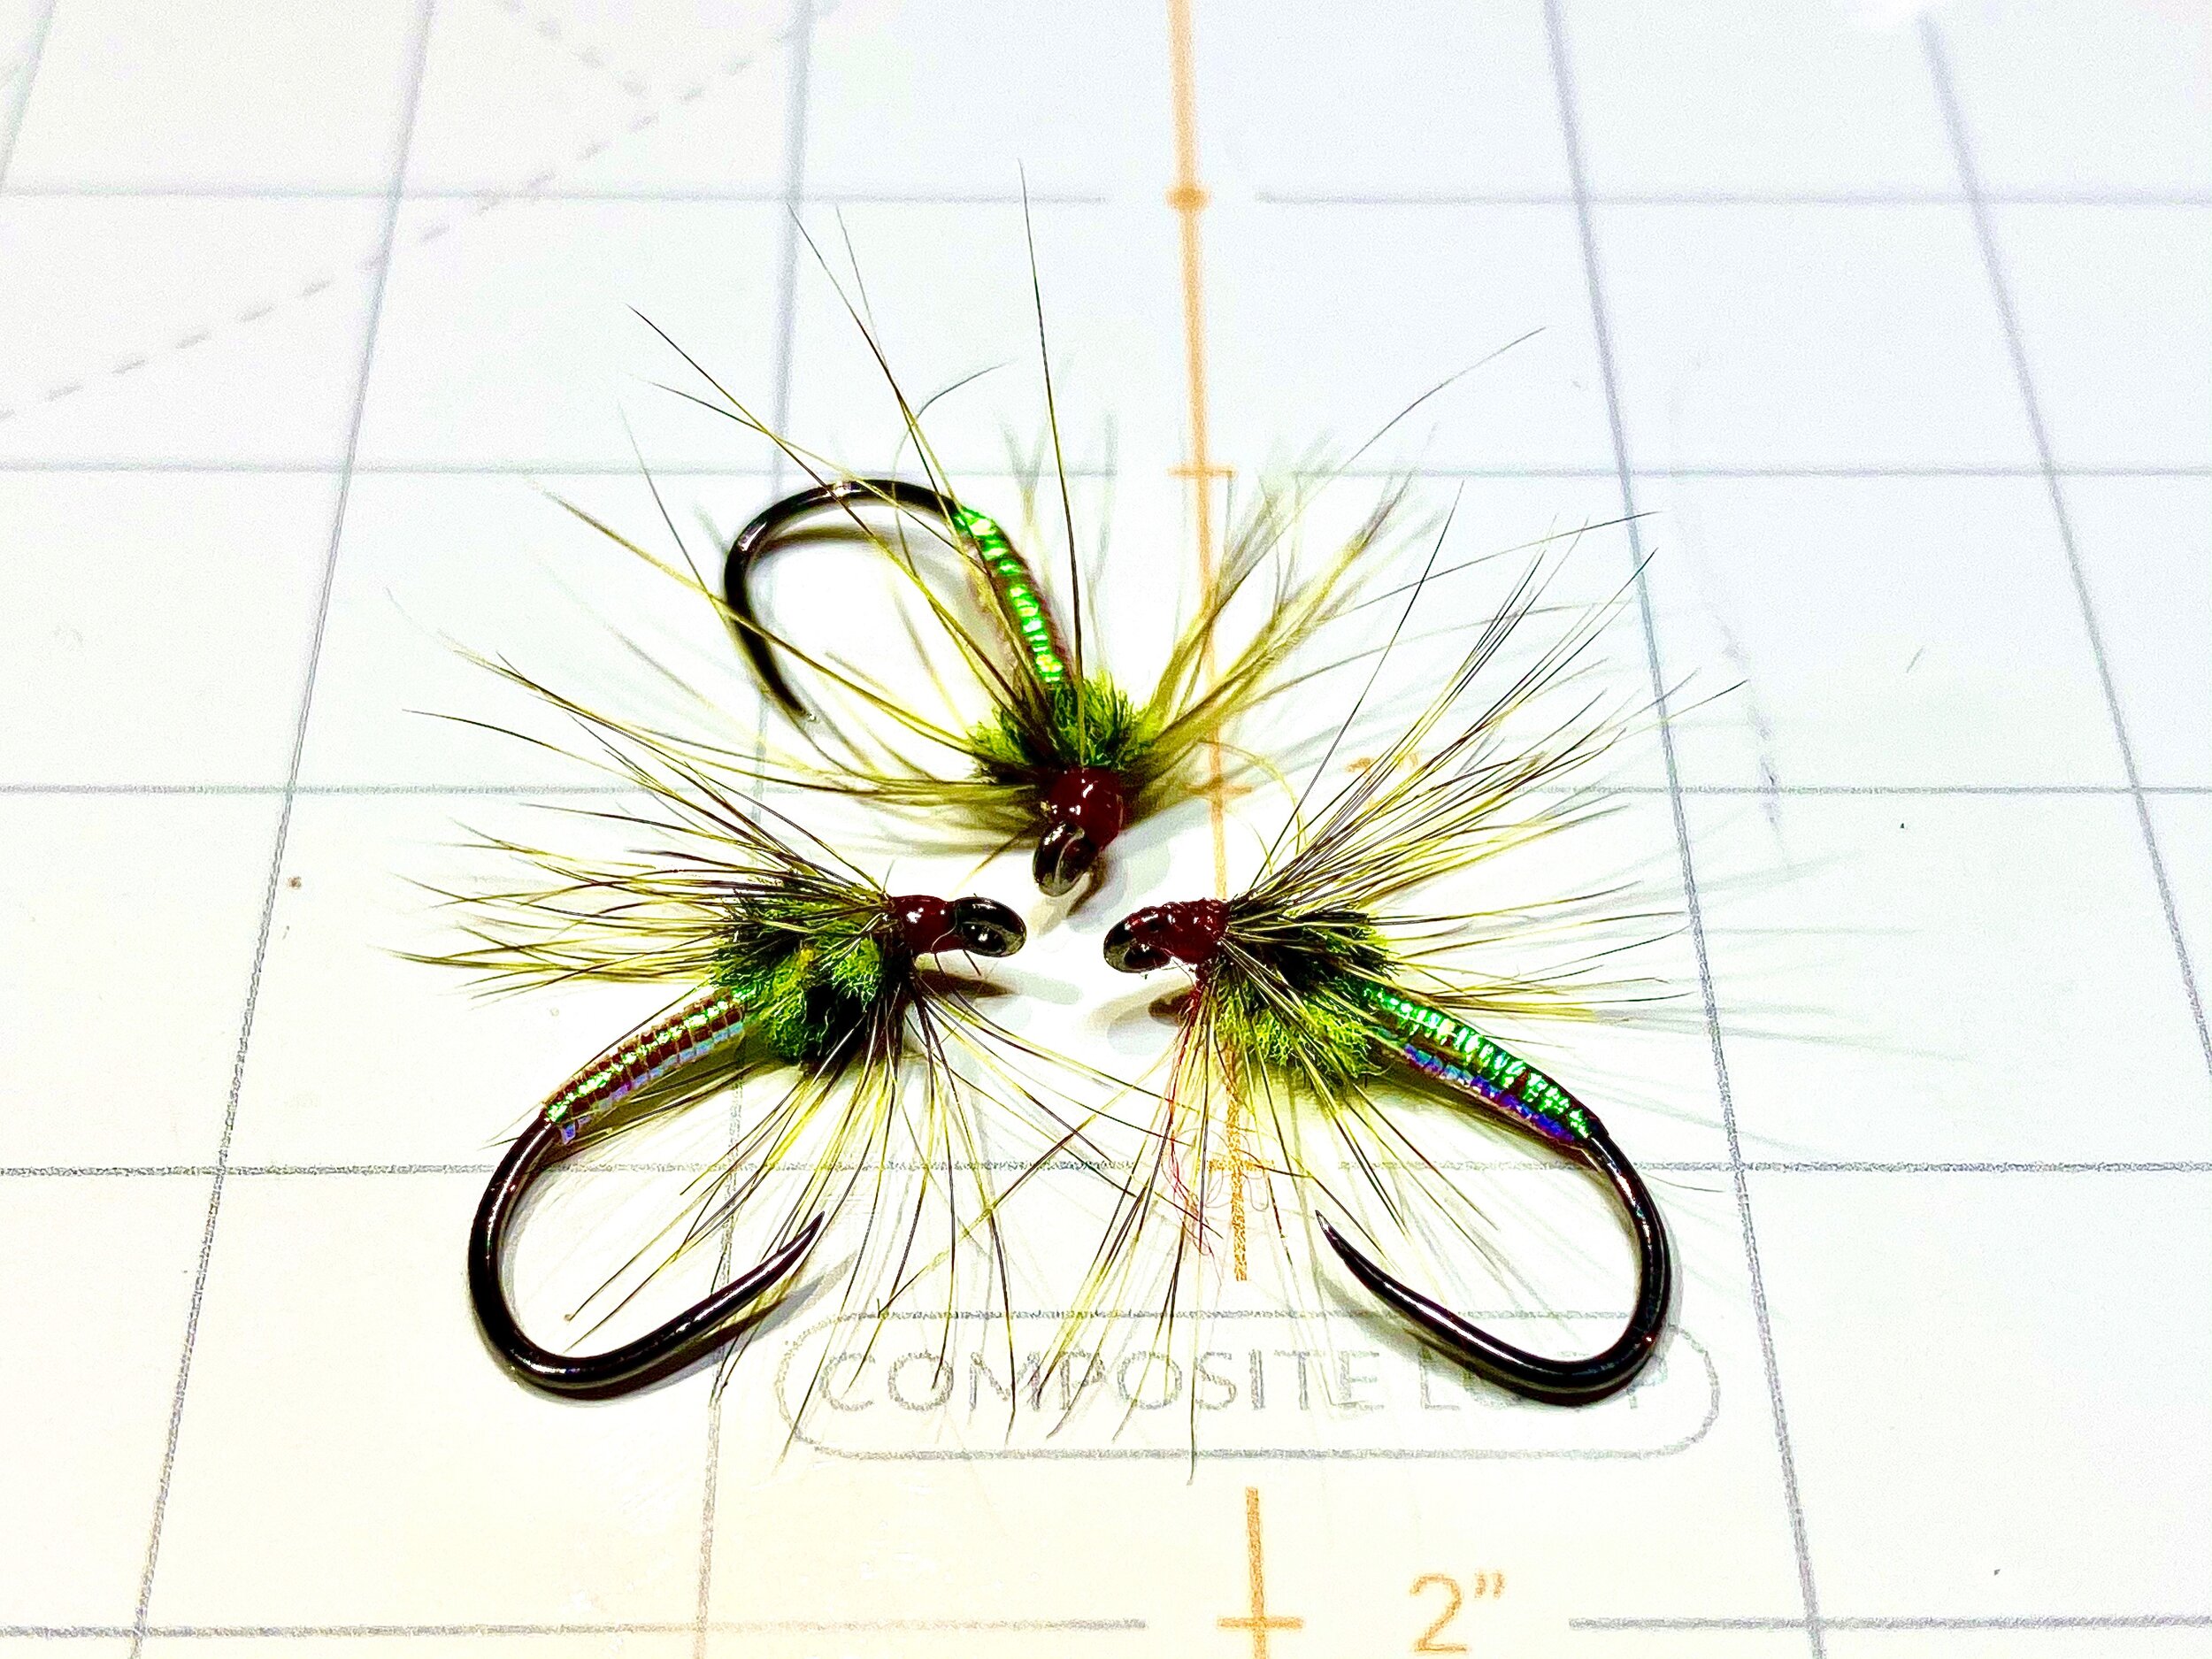 Trout Flies For Fly fishing uk Trout Epoxy Buzzers UK Hook Size 12 